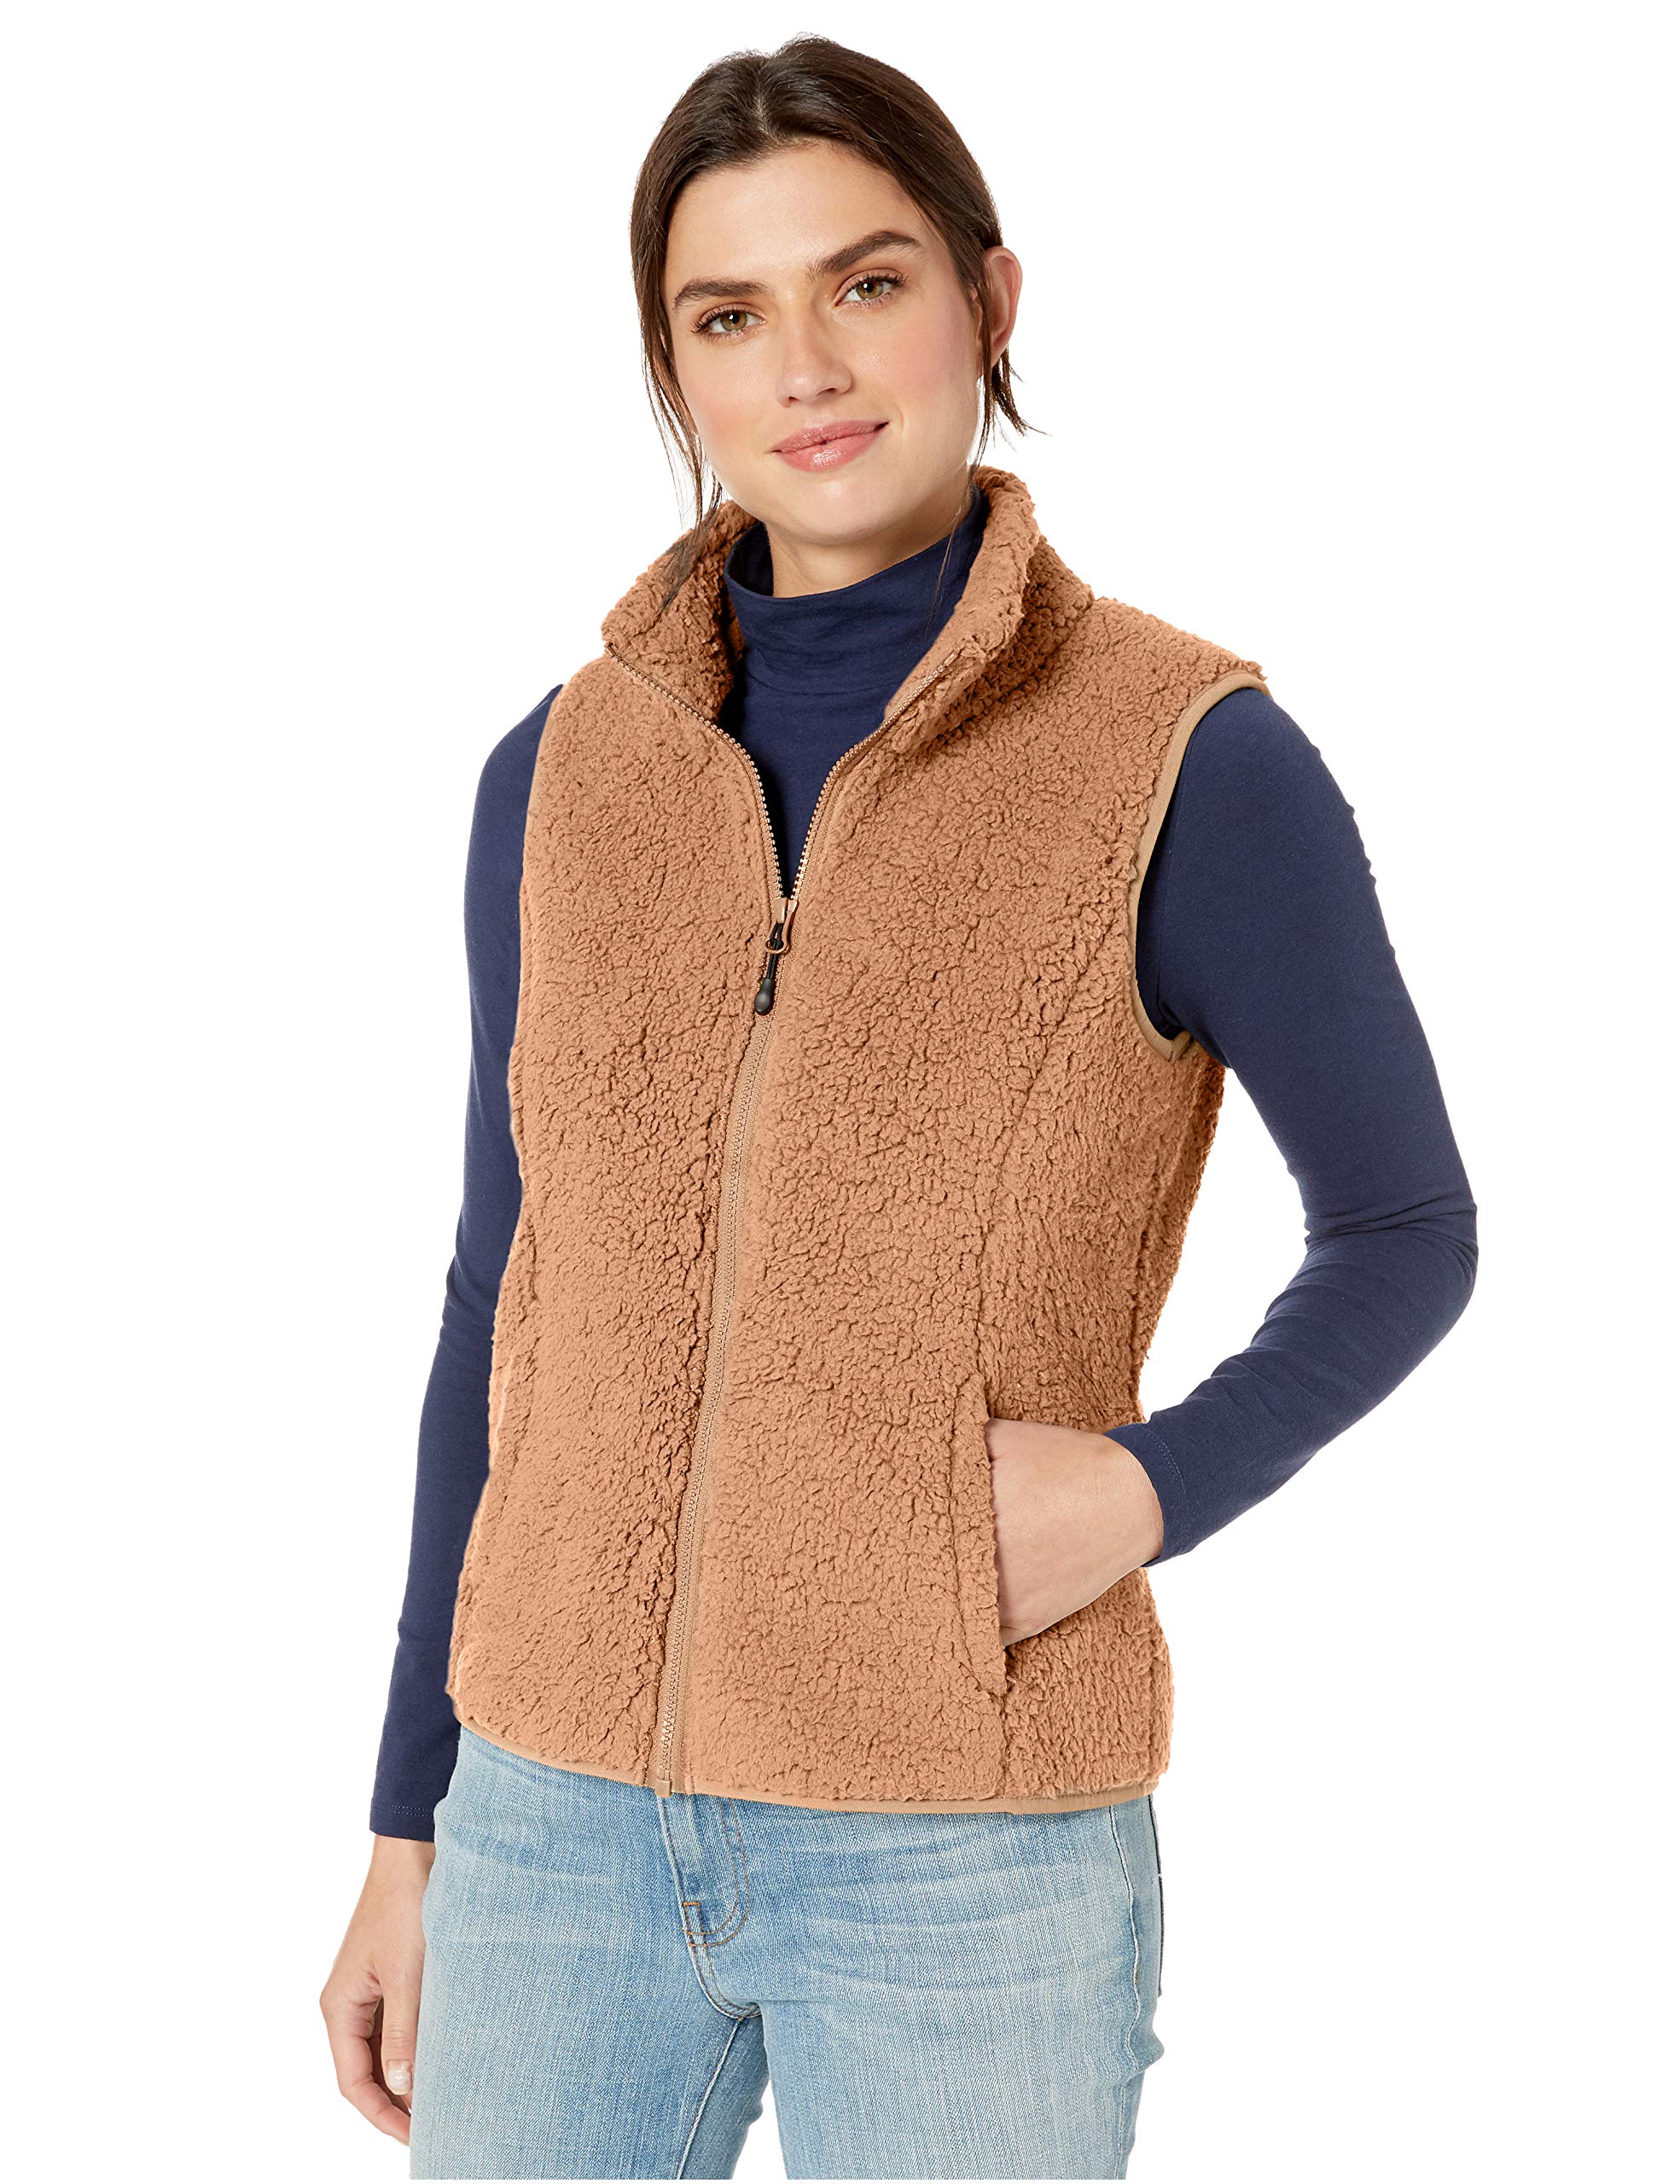 Essentials Womens Polar Fleece Lined Sherpa Full-Zip Jacket shop for things you love Authentic 